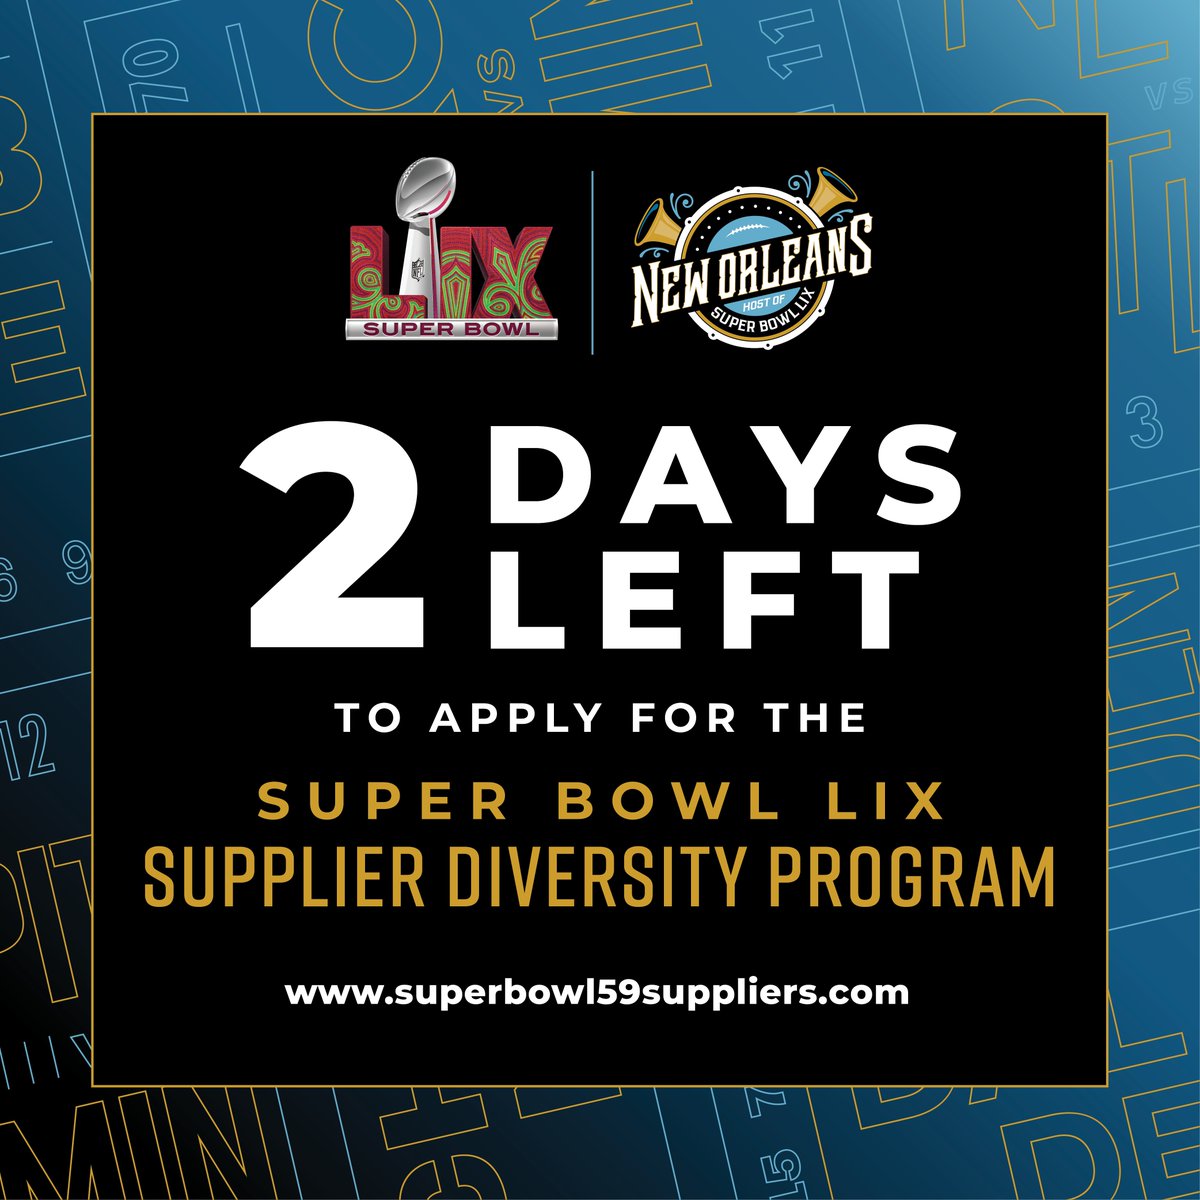 The NFL and @nolasuperbowlhc want to engage opportunity-ready businesses within Greater New Orleans to support the production of Super Bowl LIX. The deadline to apply is Sunday, April 7. To learn more visit superbowl59suppliers.com